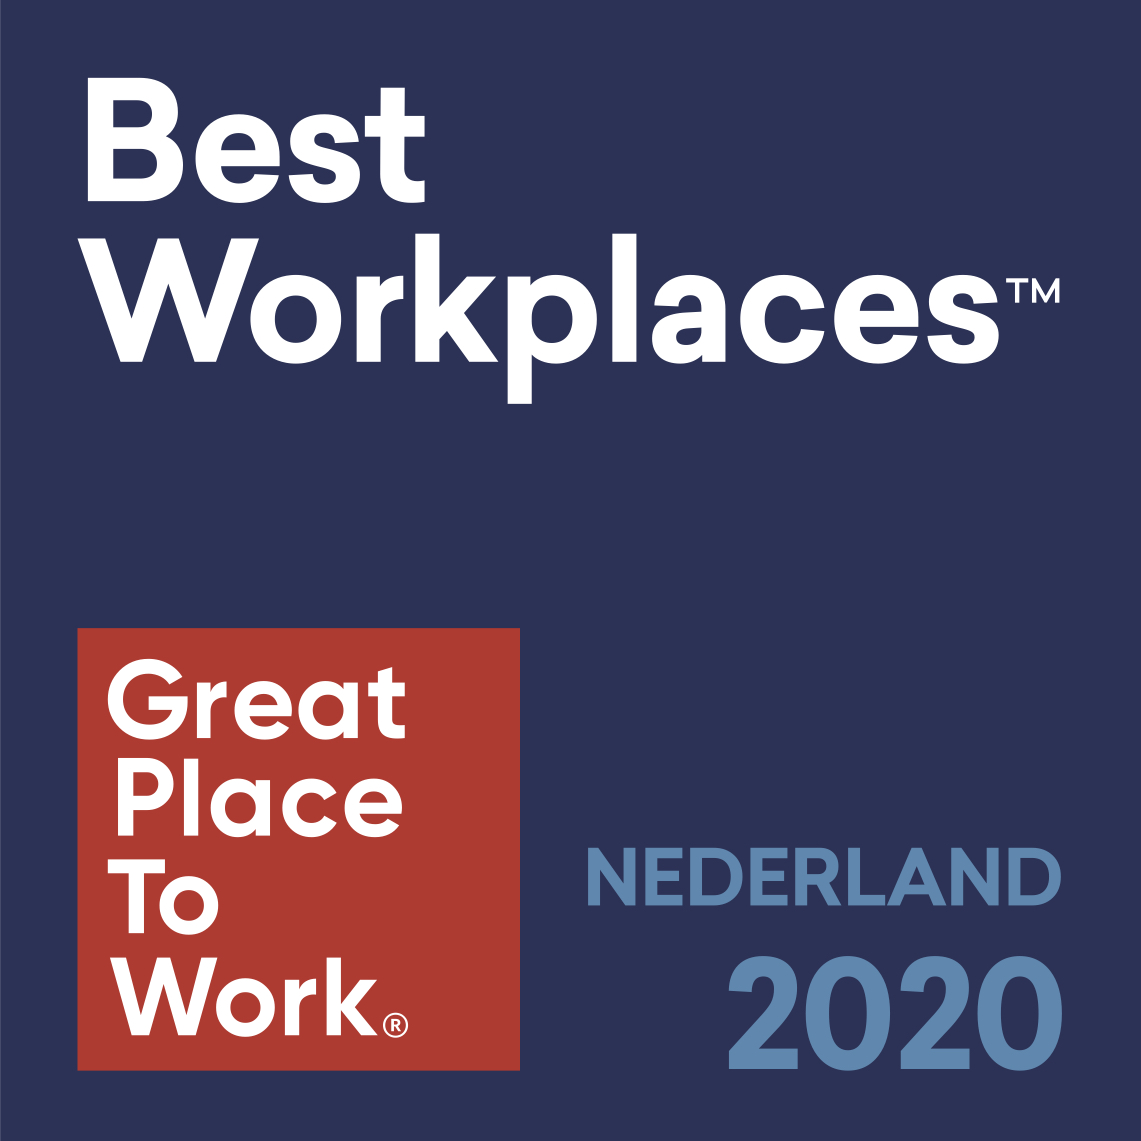 Great Place To Work onthult Best Workplaces 2020 Emerce